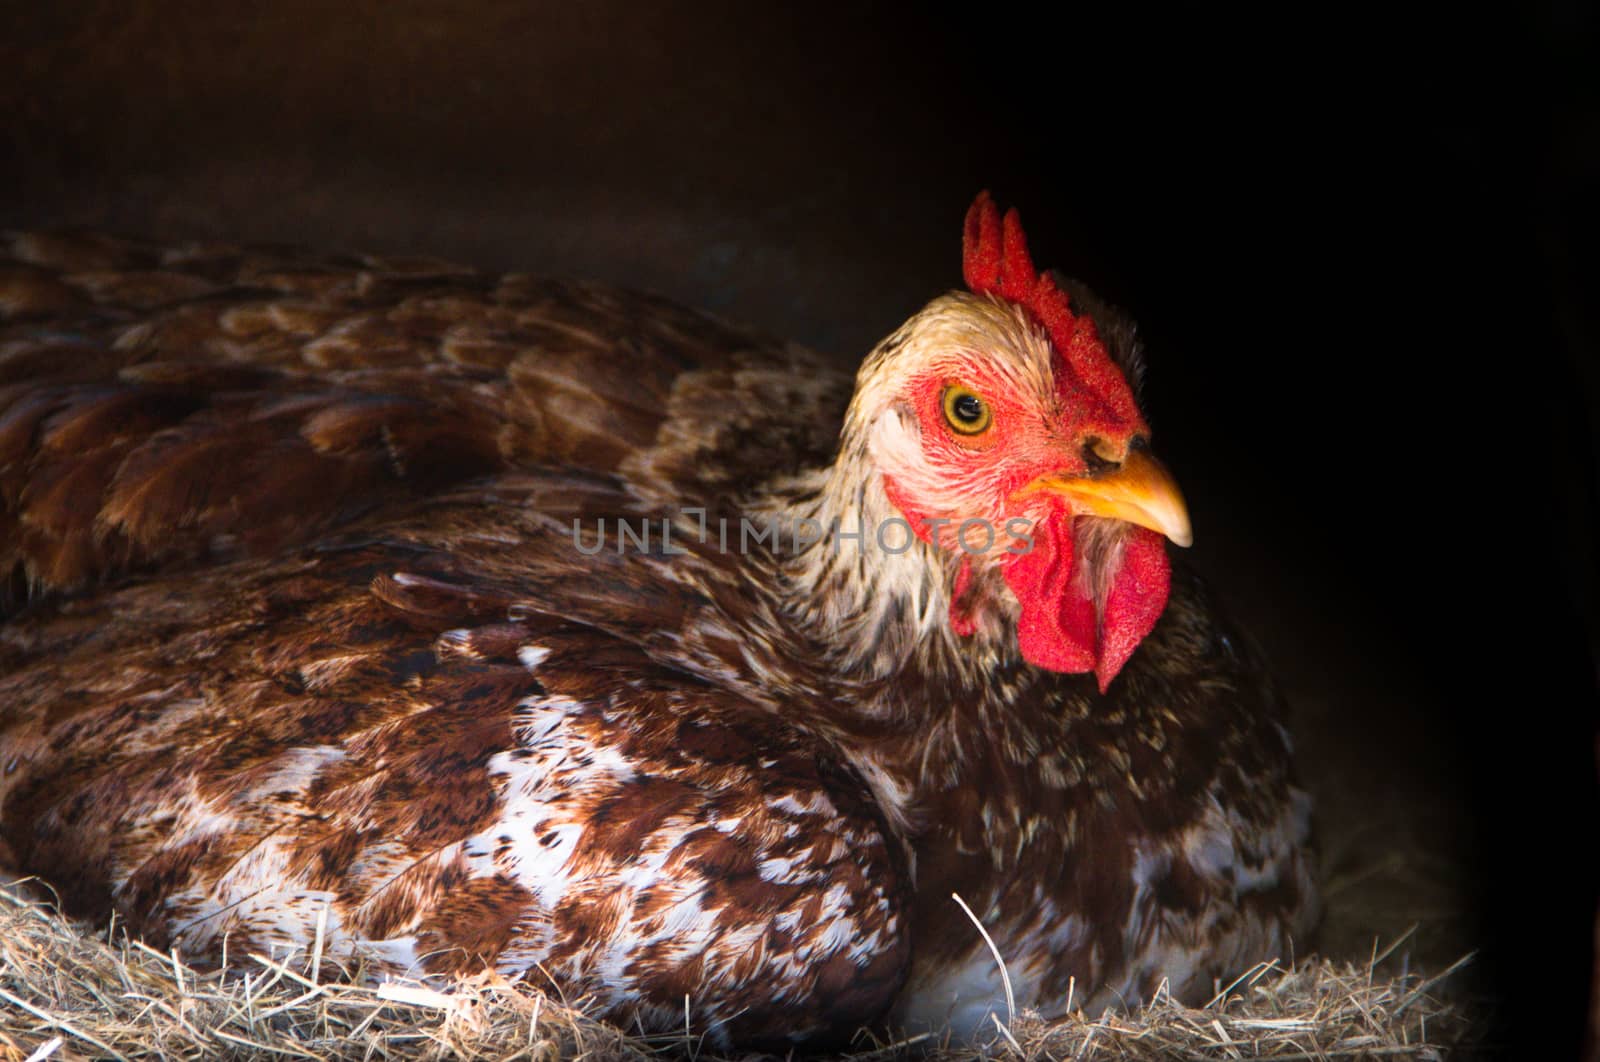 broody hen brooding in the nest of the farm by GabrielaBertolini